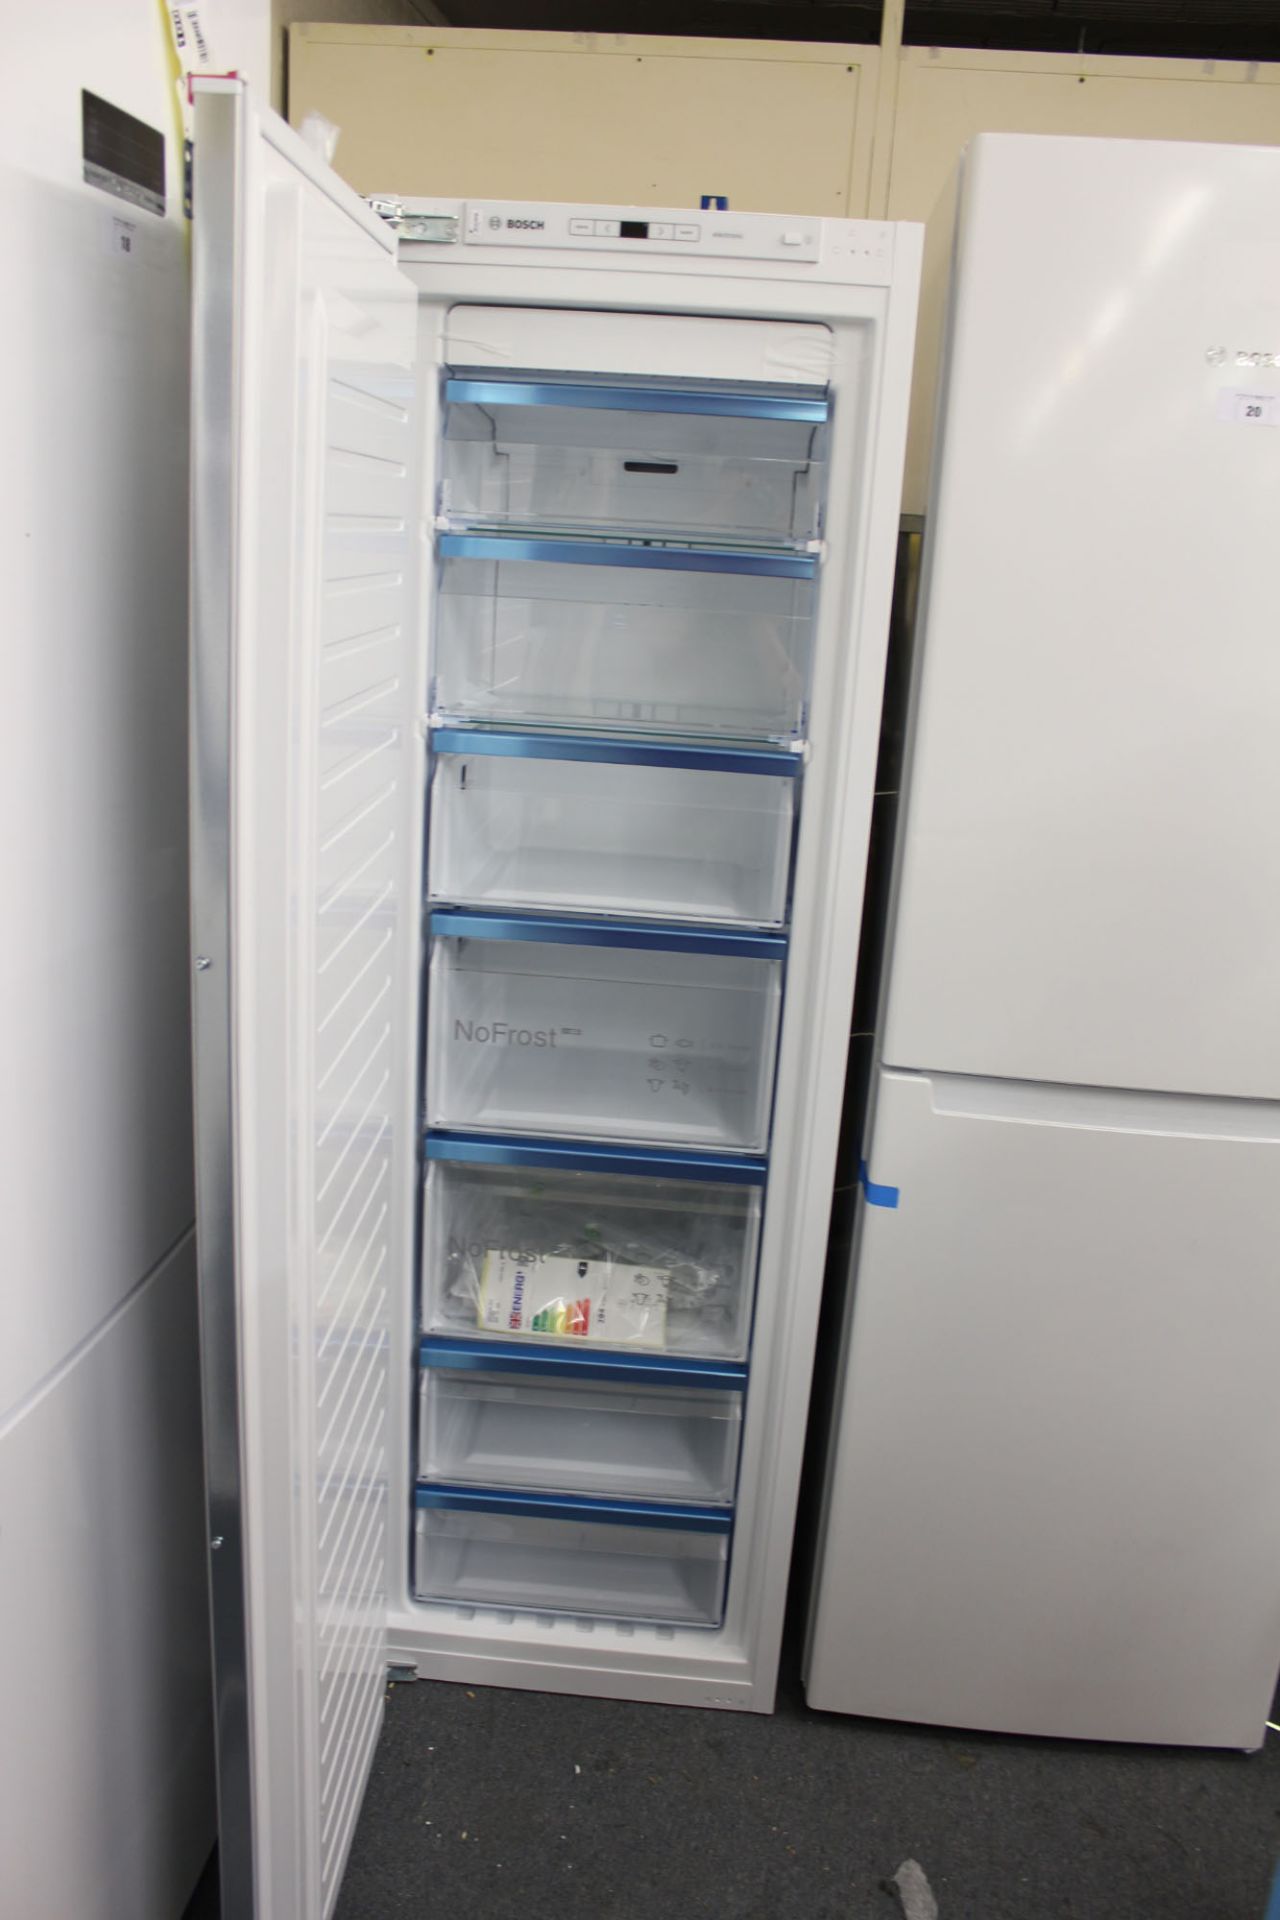 GIN81AEF0GB Bosch Built-in upright freezer - Image 2 of 2